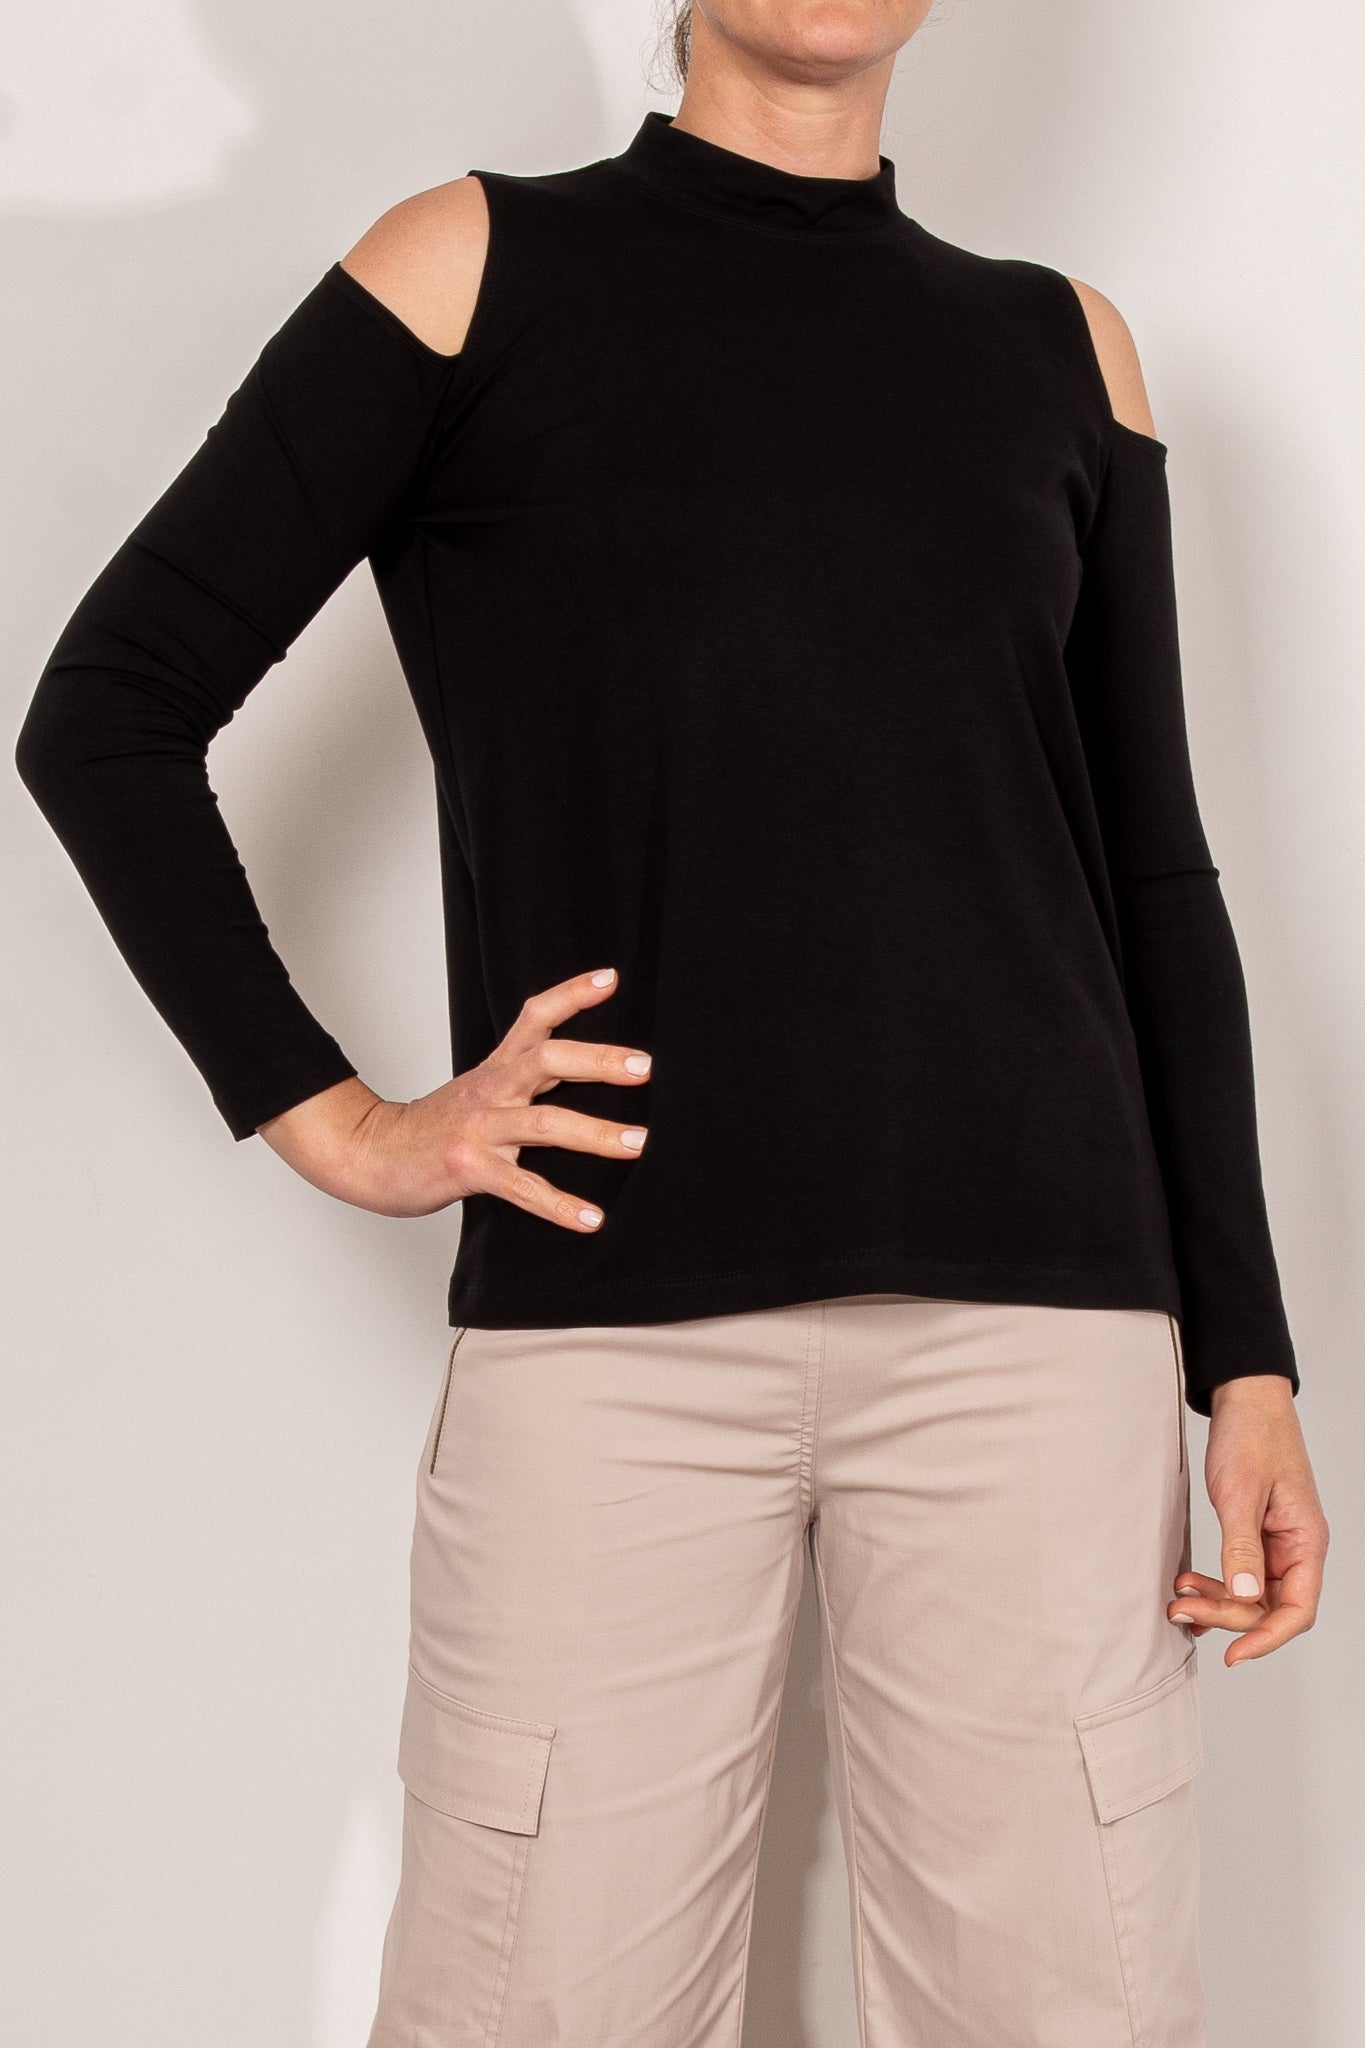 Mela Purdie Relaxed Cut Out Top Jersey